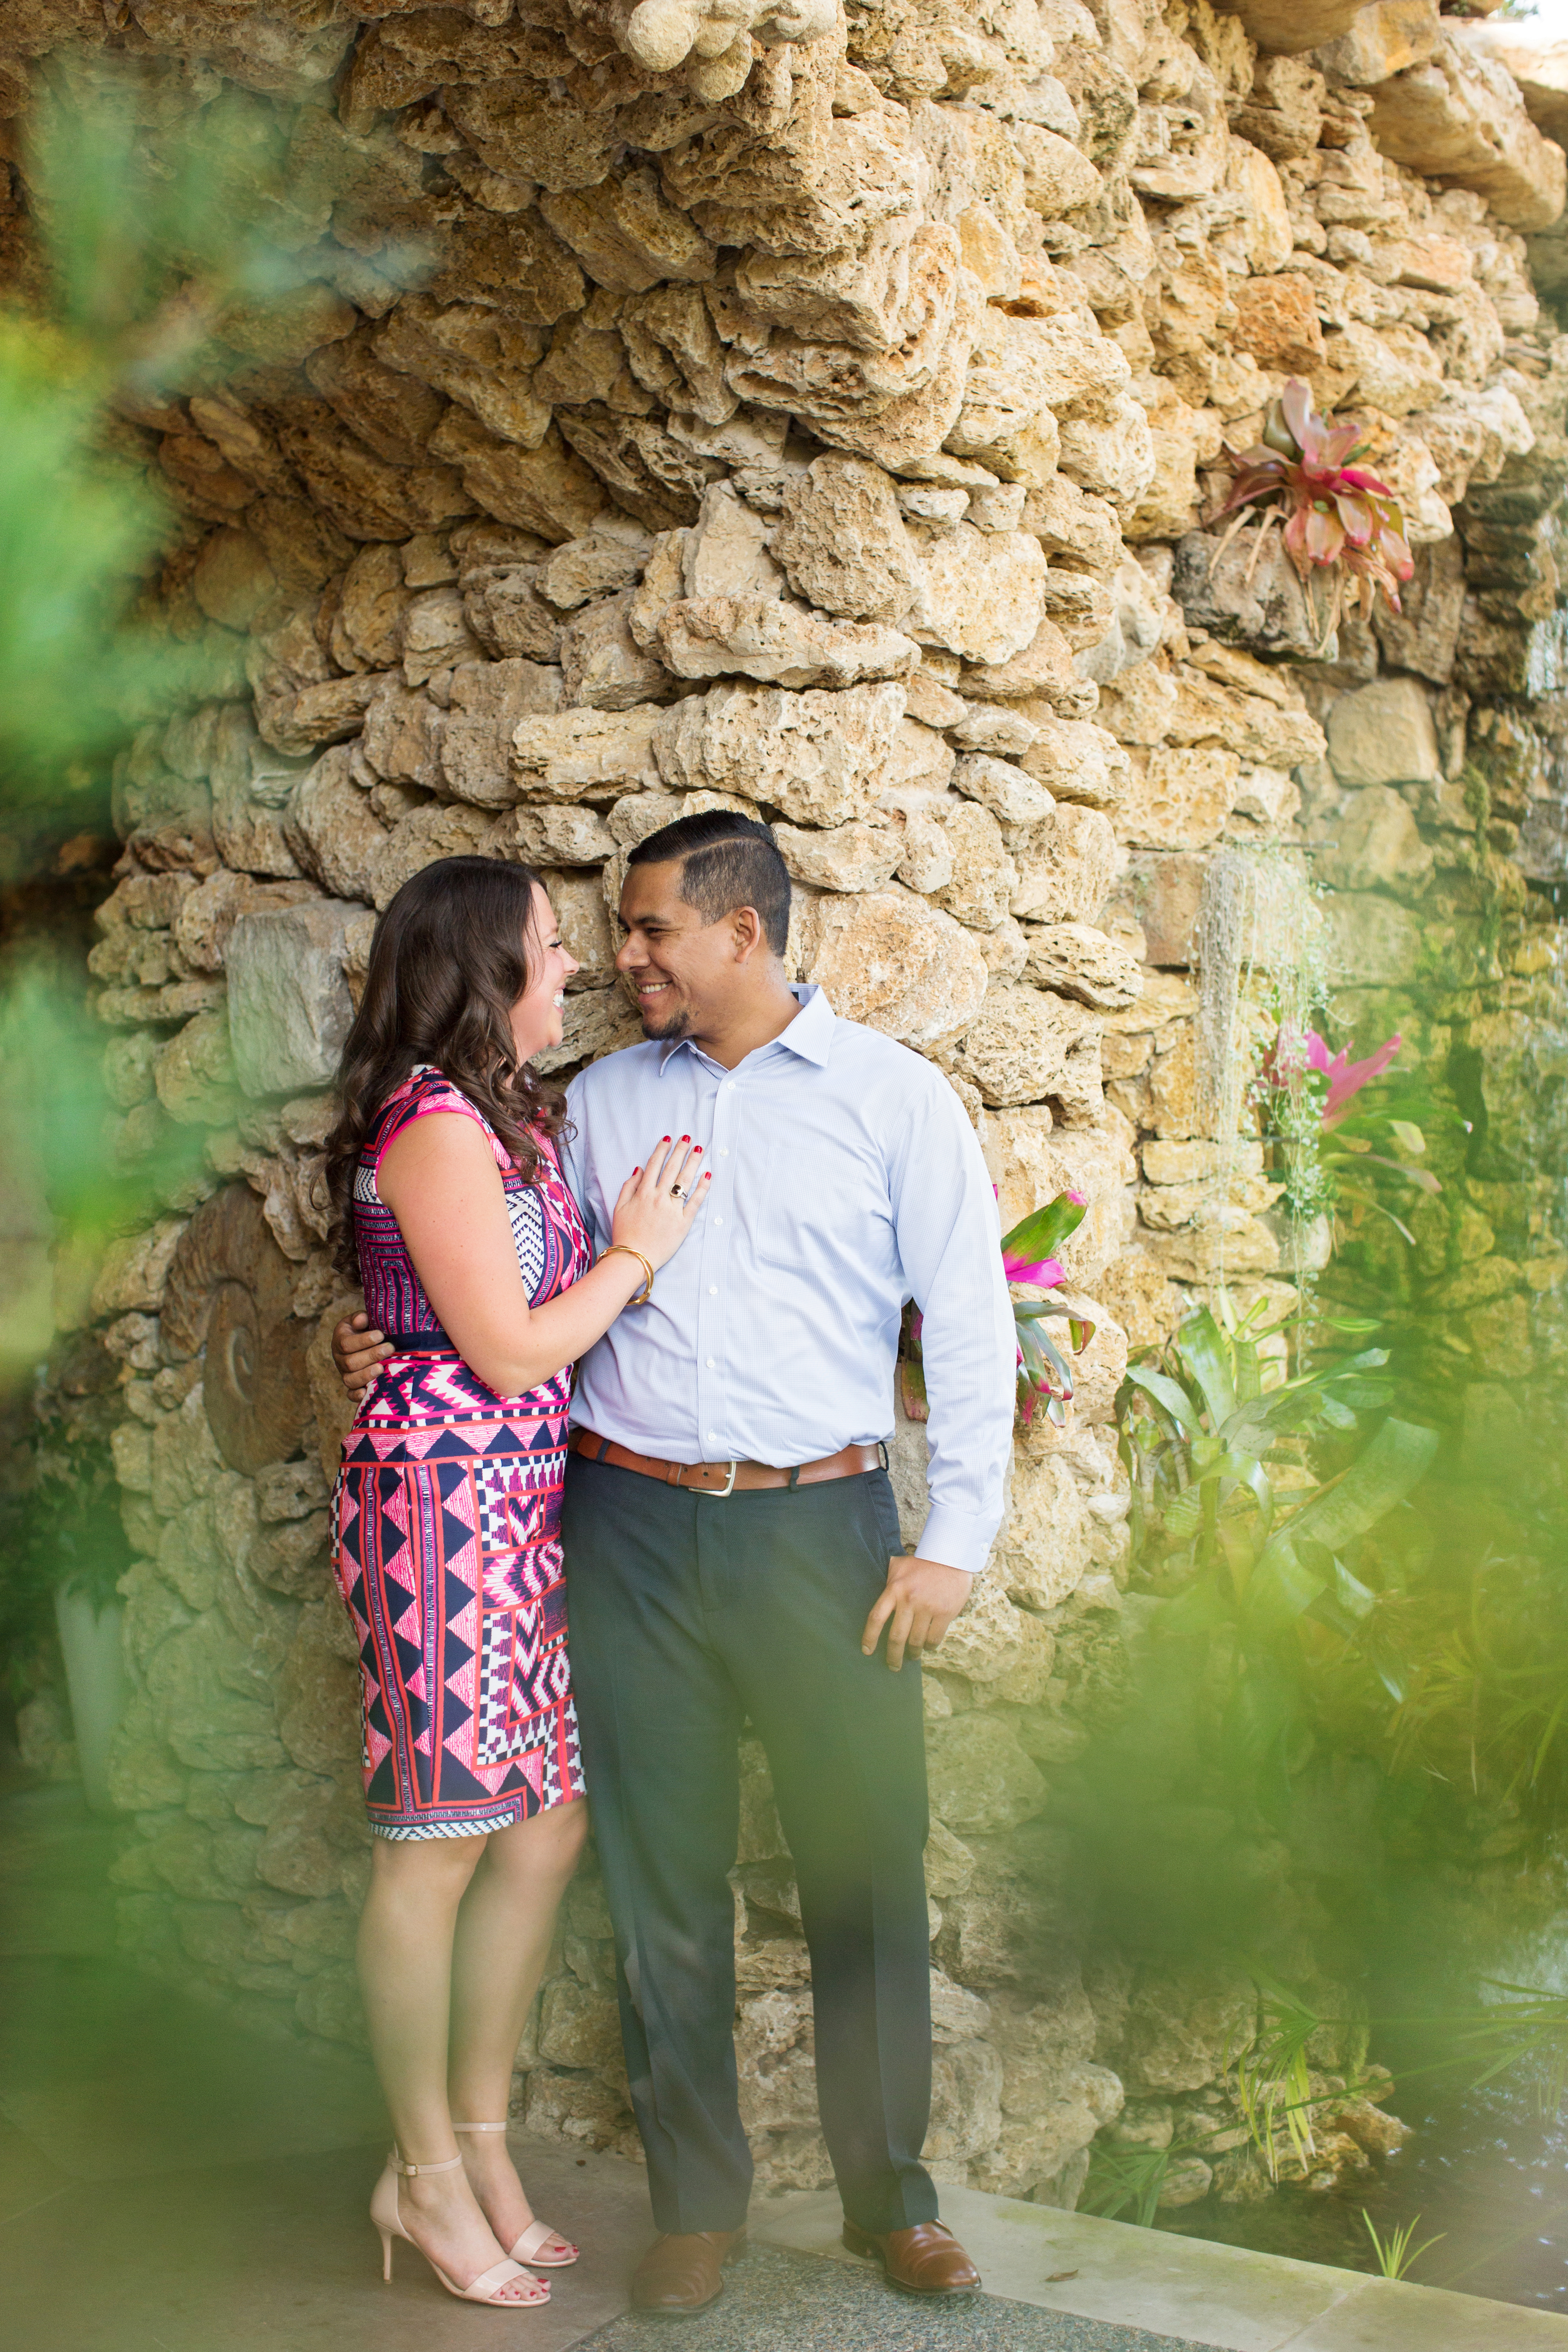 Dallas Wedding Planners | Valentine's Date Ideas for Engaged Couples